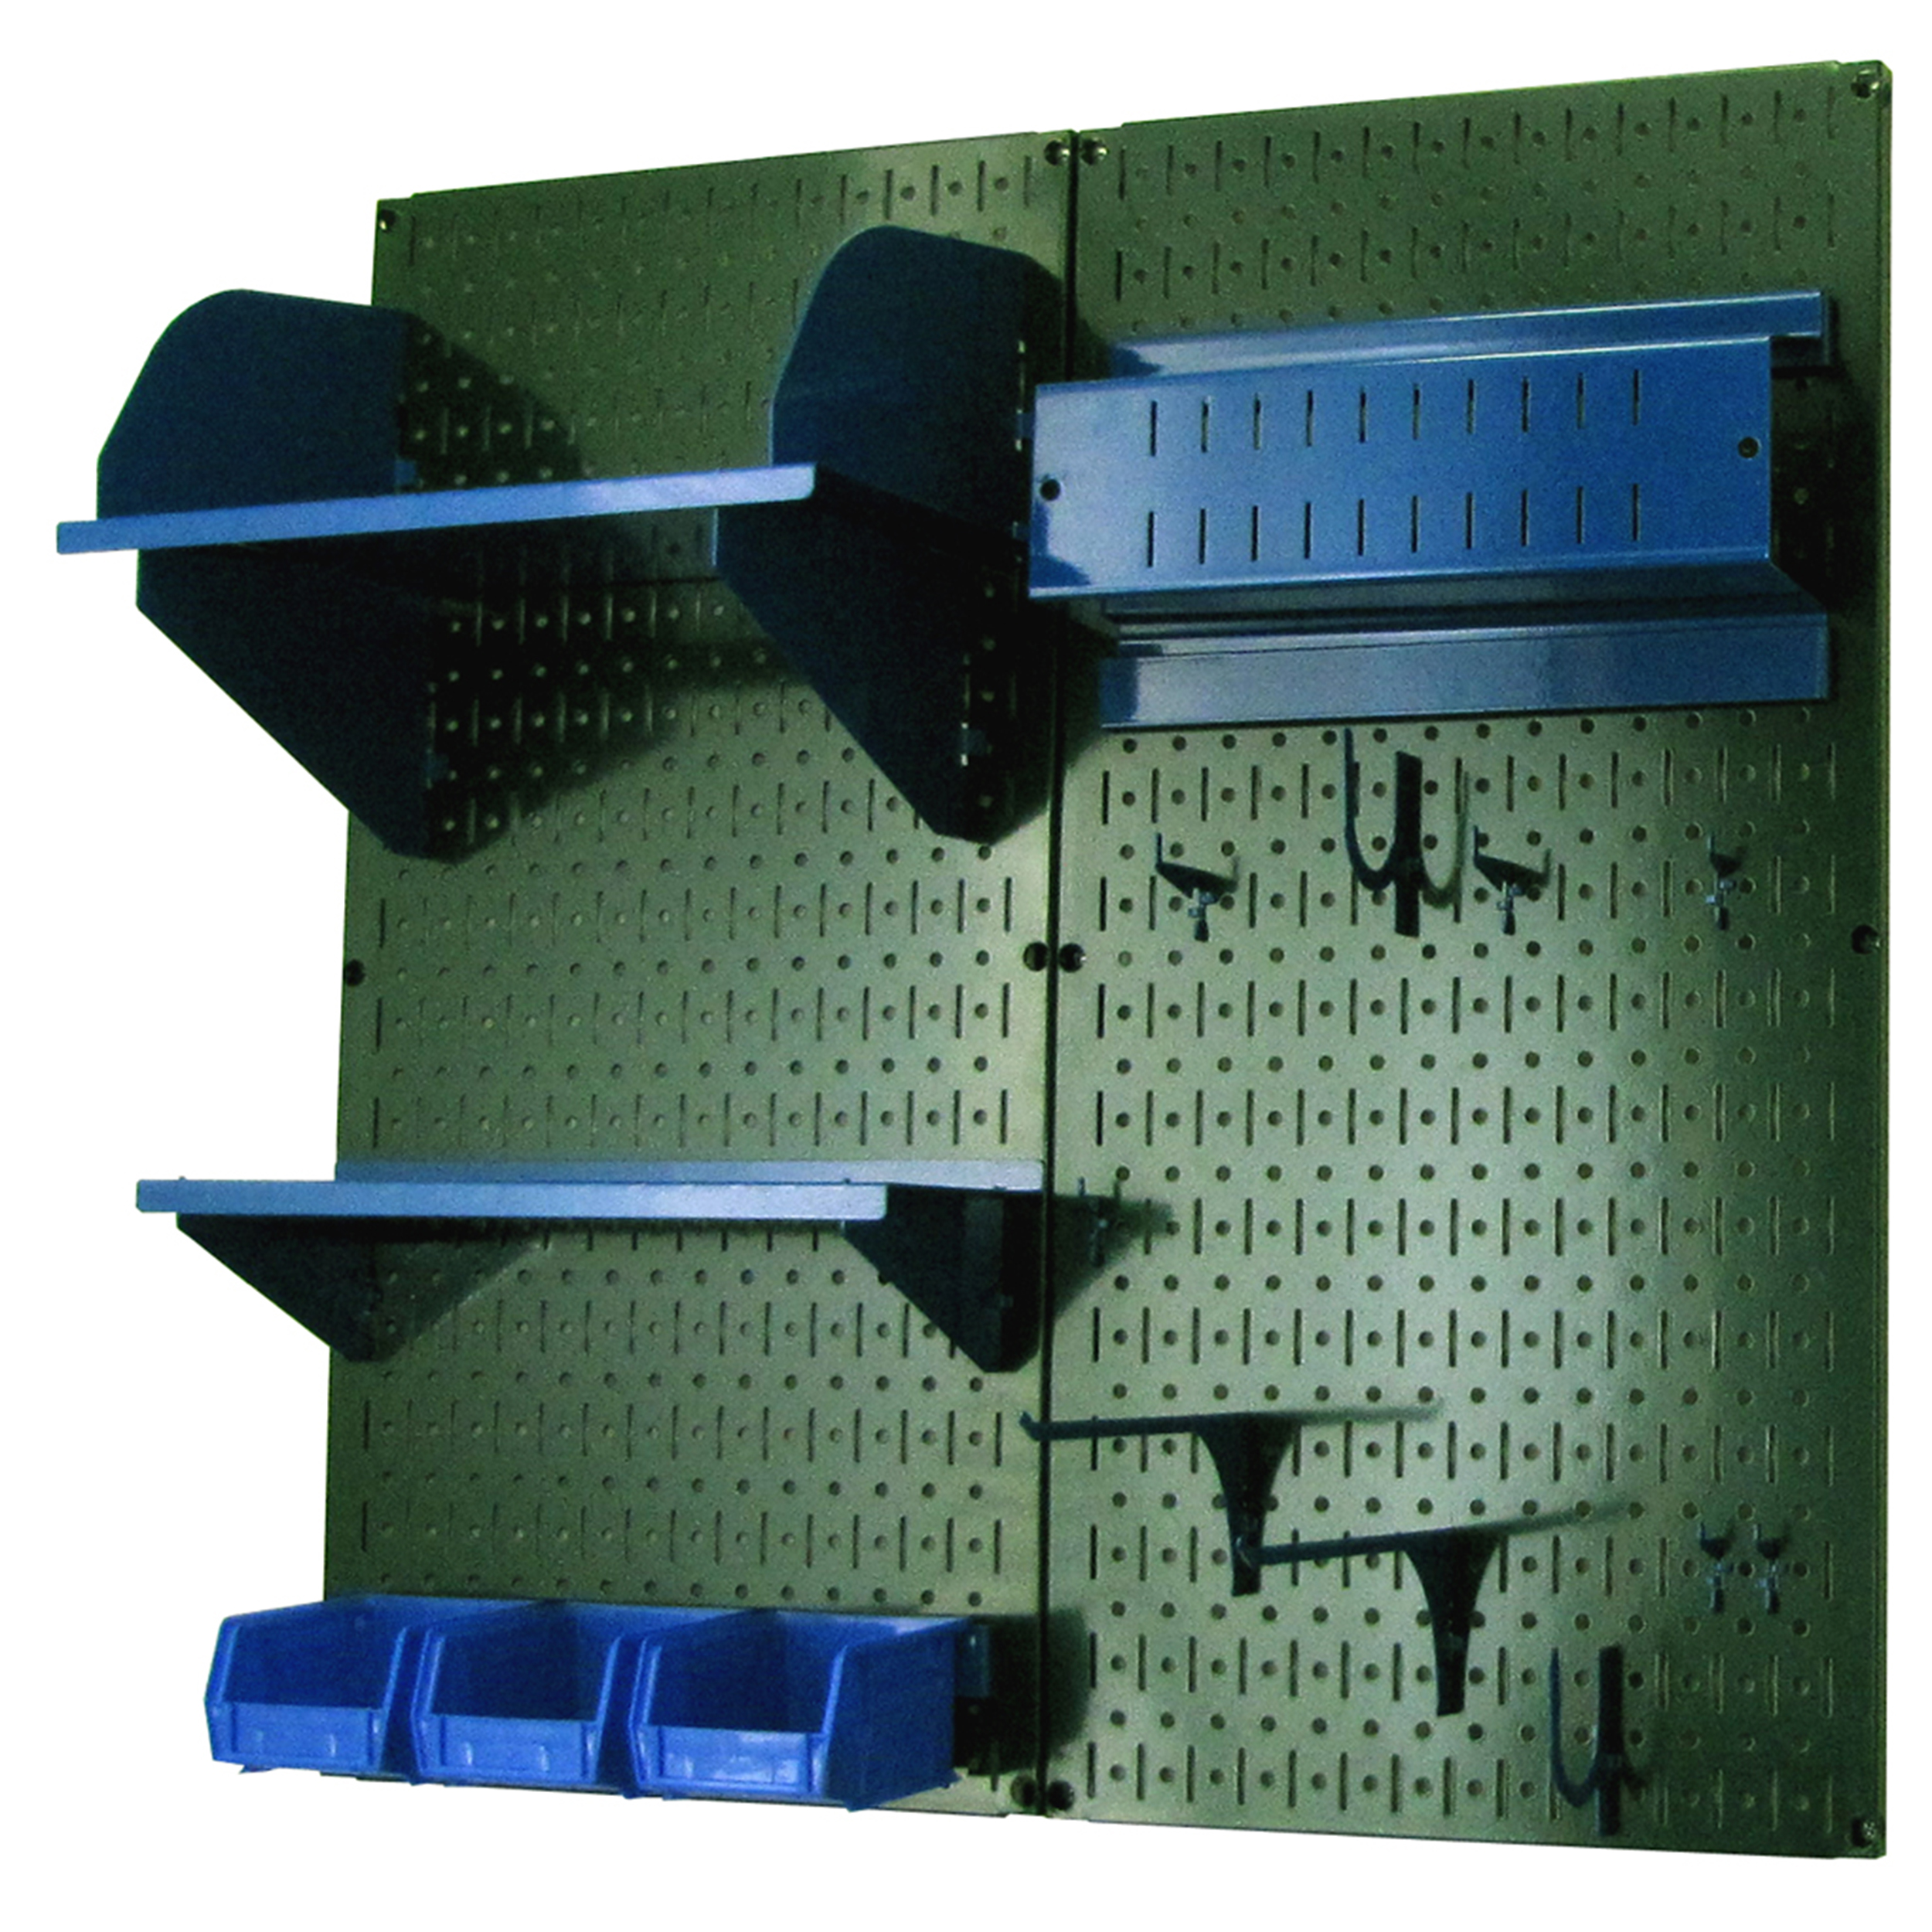 Pegboard Hobby Craft Pegboard Organizer Storage Kit With Green Pegboard And Blue Accessories